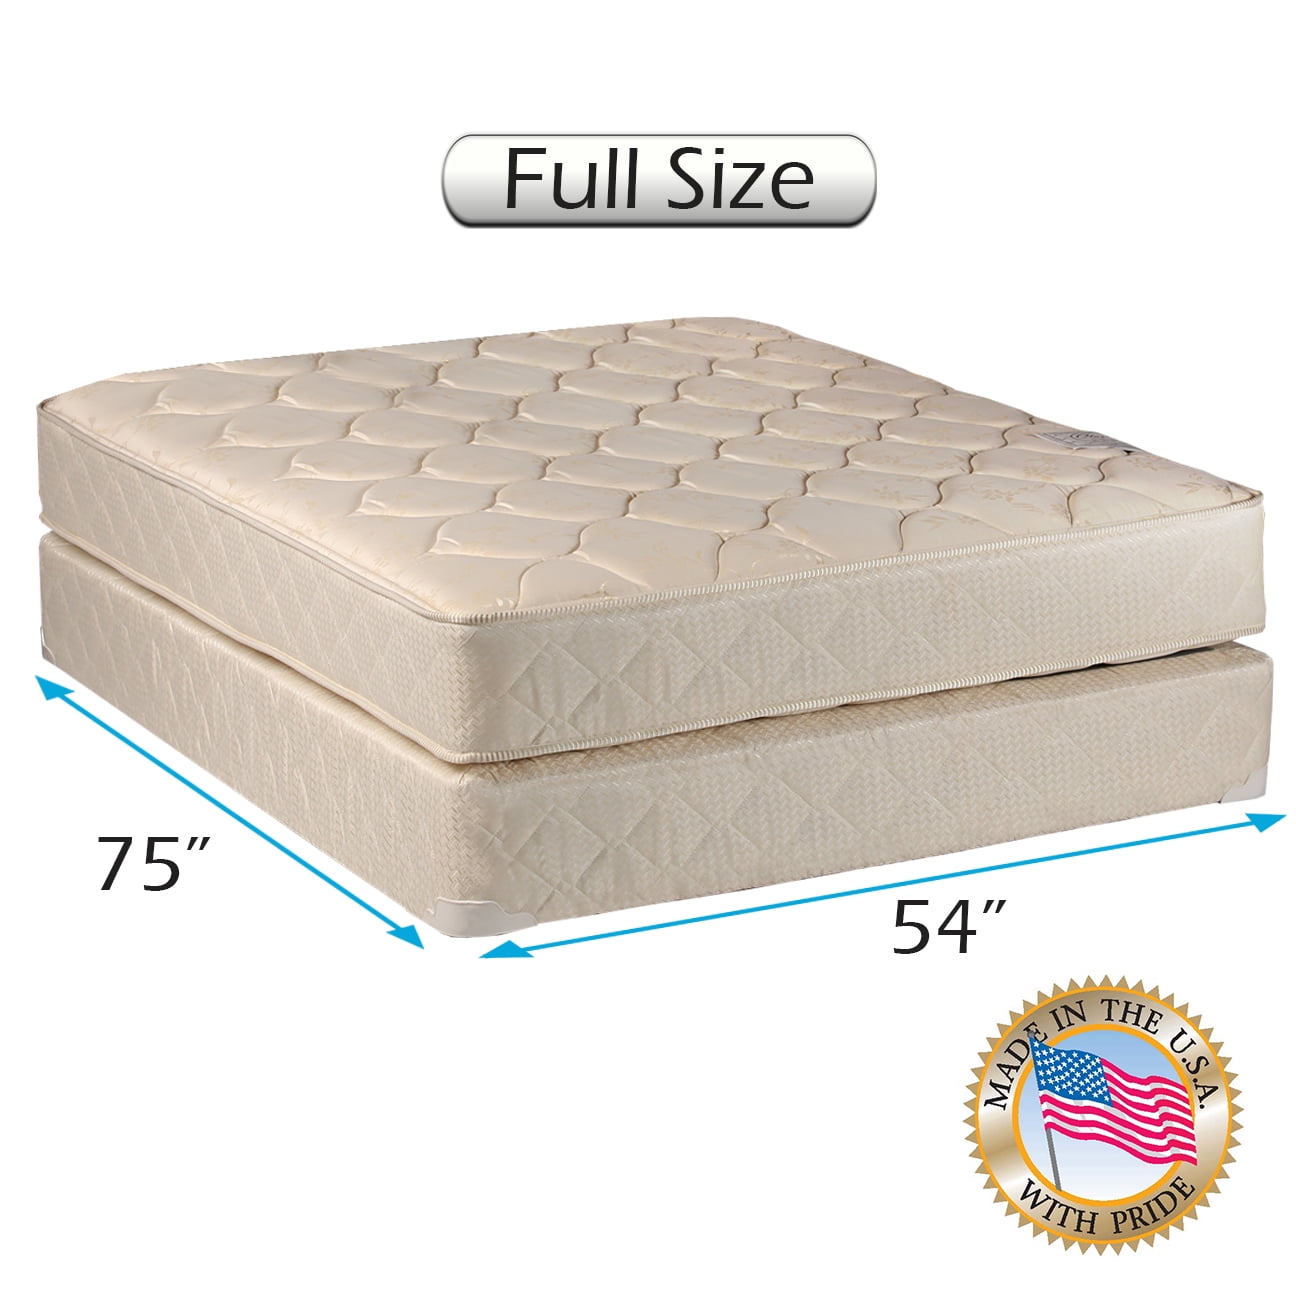 Dream Sleep Comfort Classic SingleSided Full Gentle Firm Mattress and Box Spring Set Fully